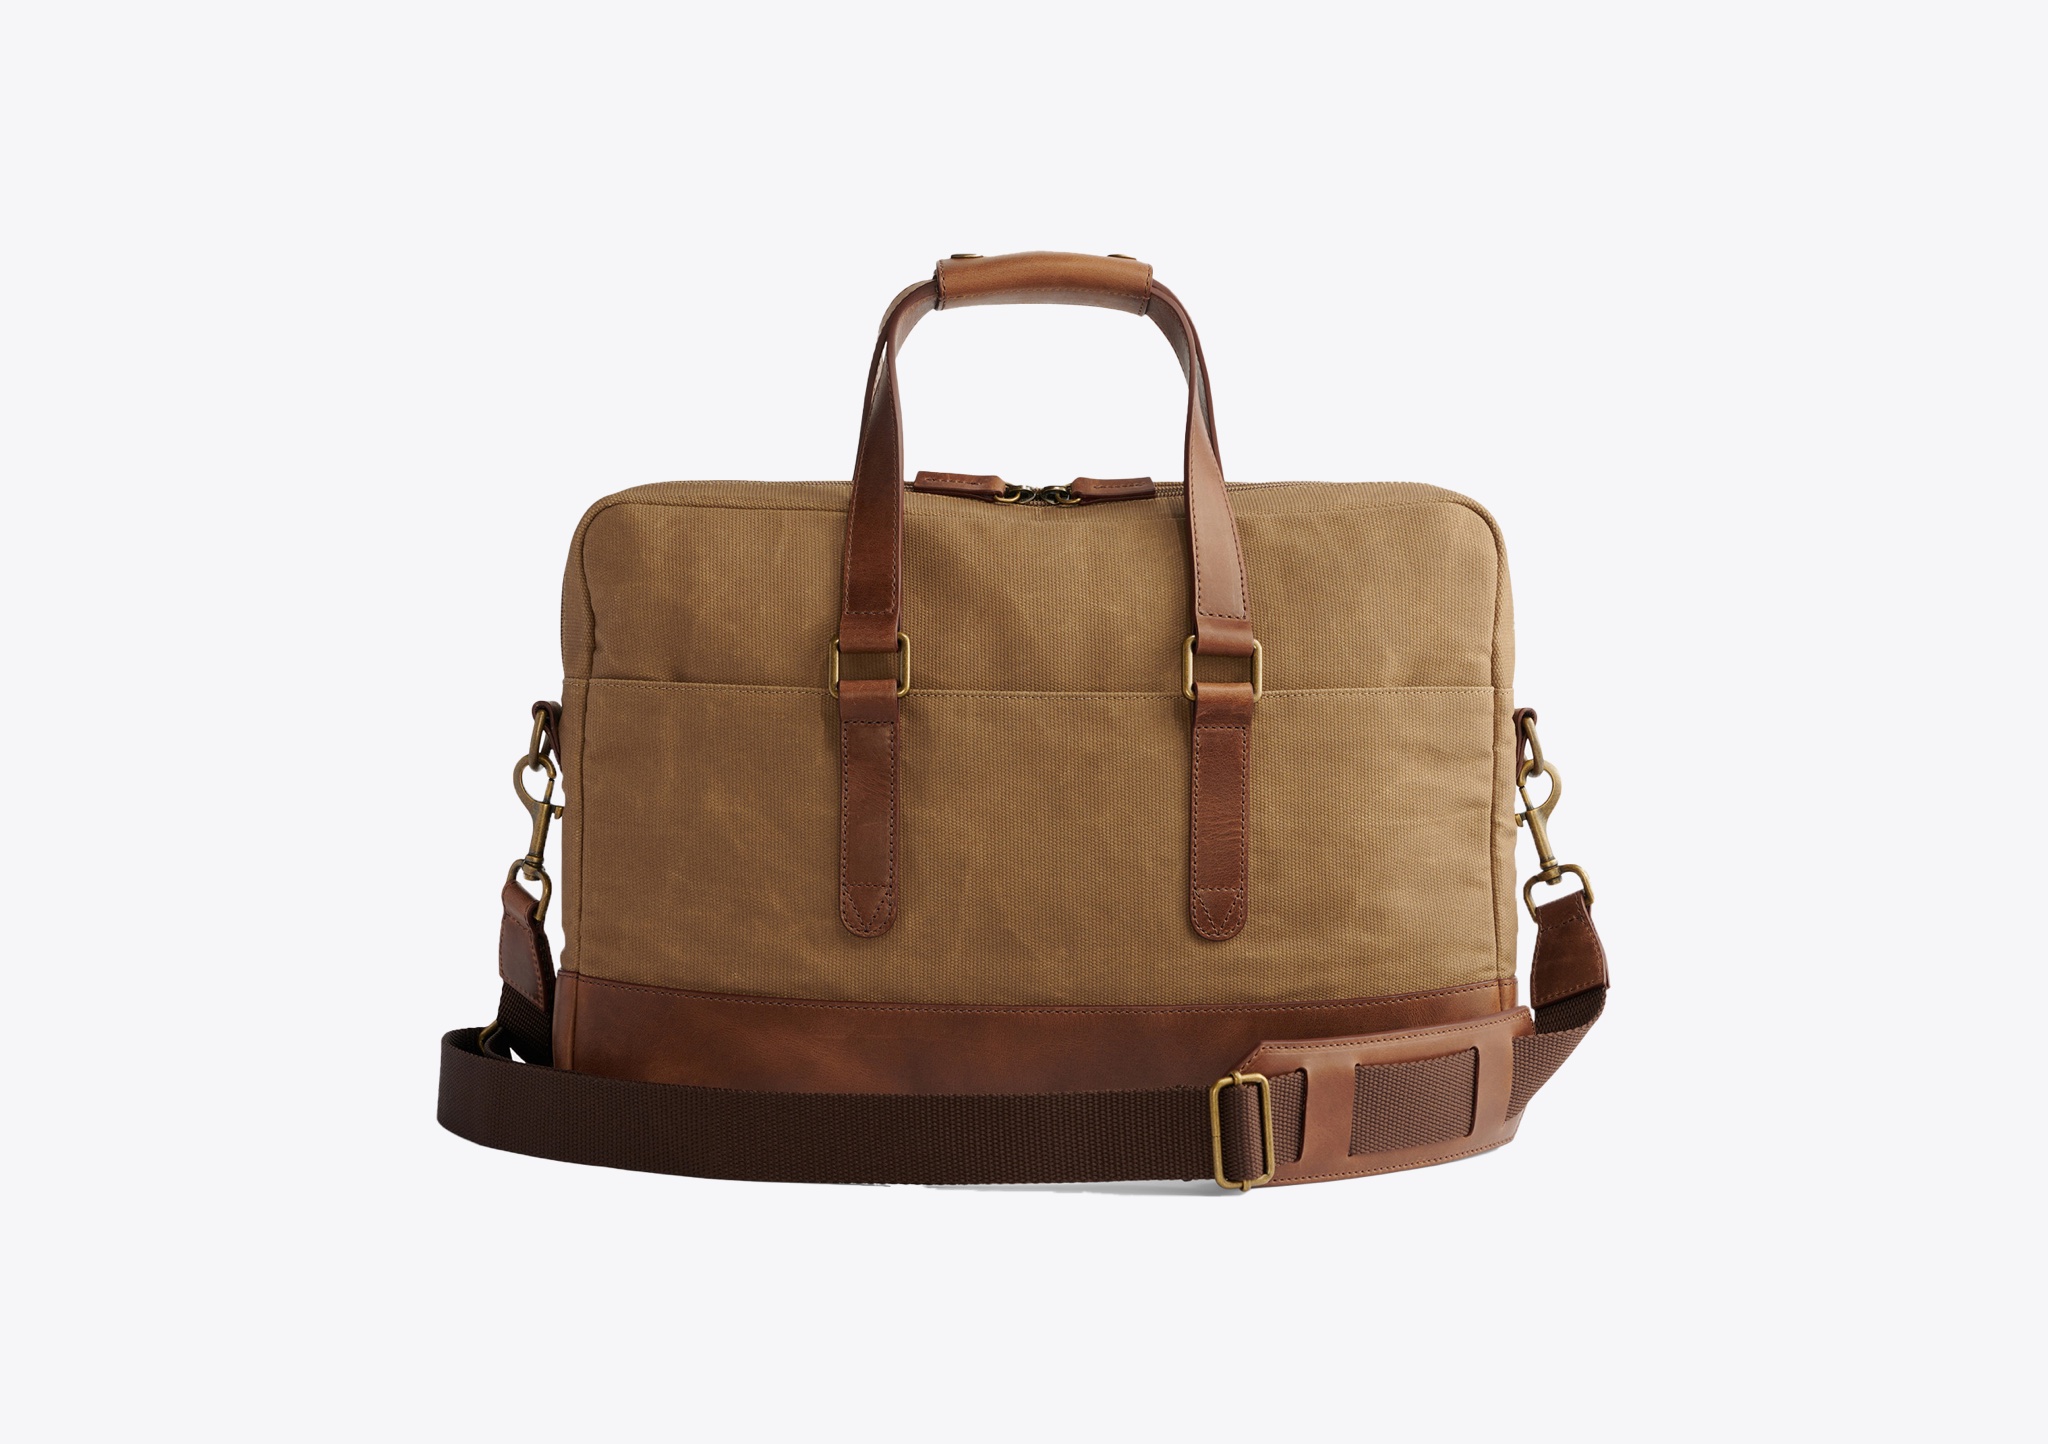 Nisolo Vincent Slim Briefcase - Every Nisolo product is built on the foundation of comfort, function, and design. 